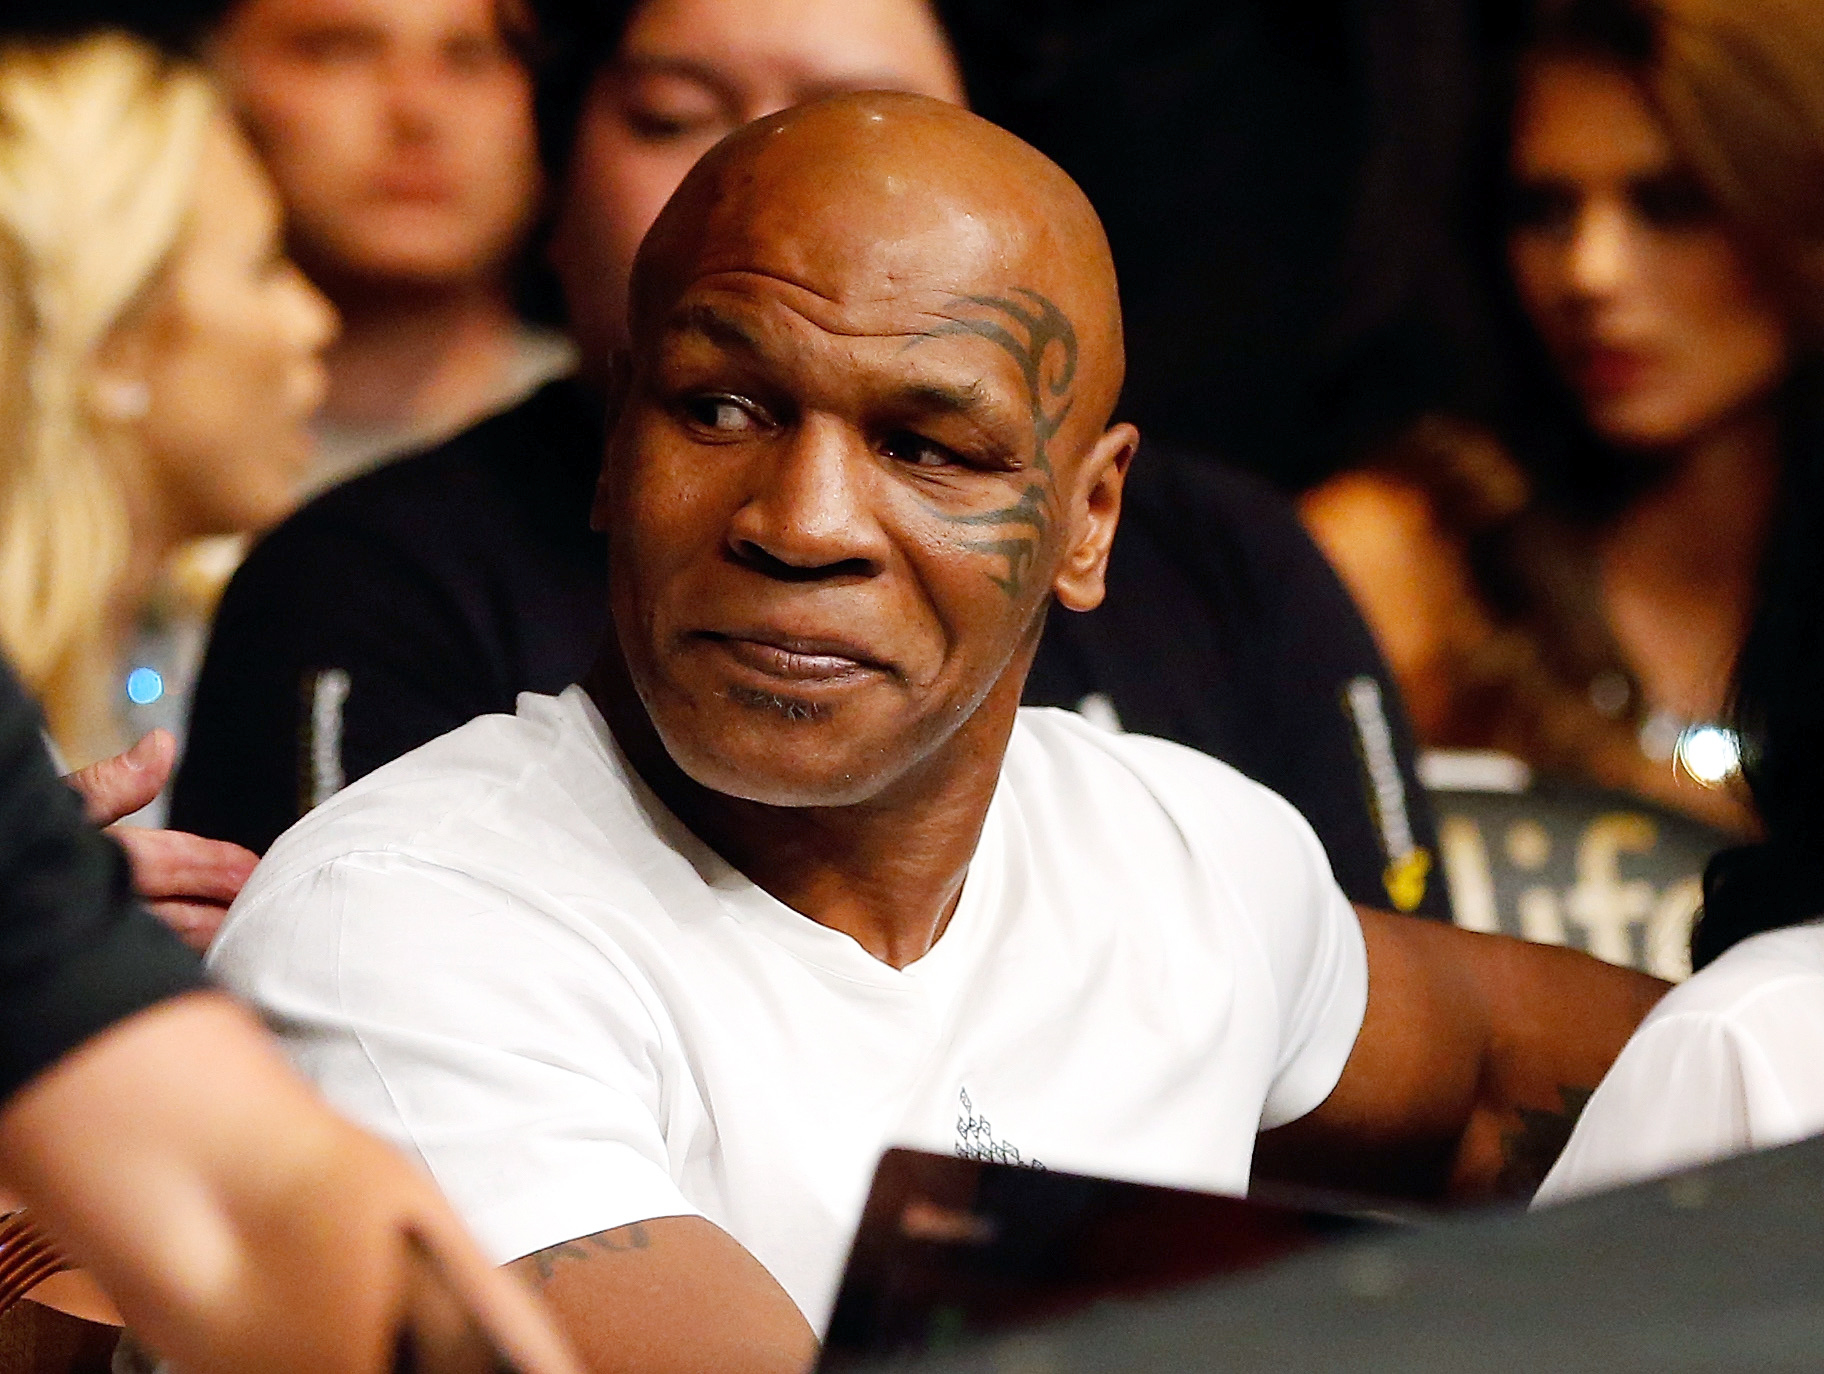 Former boxing champion Mike Tyson at the UFC 189 event on July 11, 2015 in Las Vegas. (Christian Petersen—Getty Images)